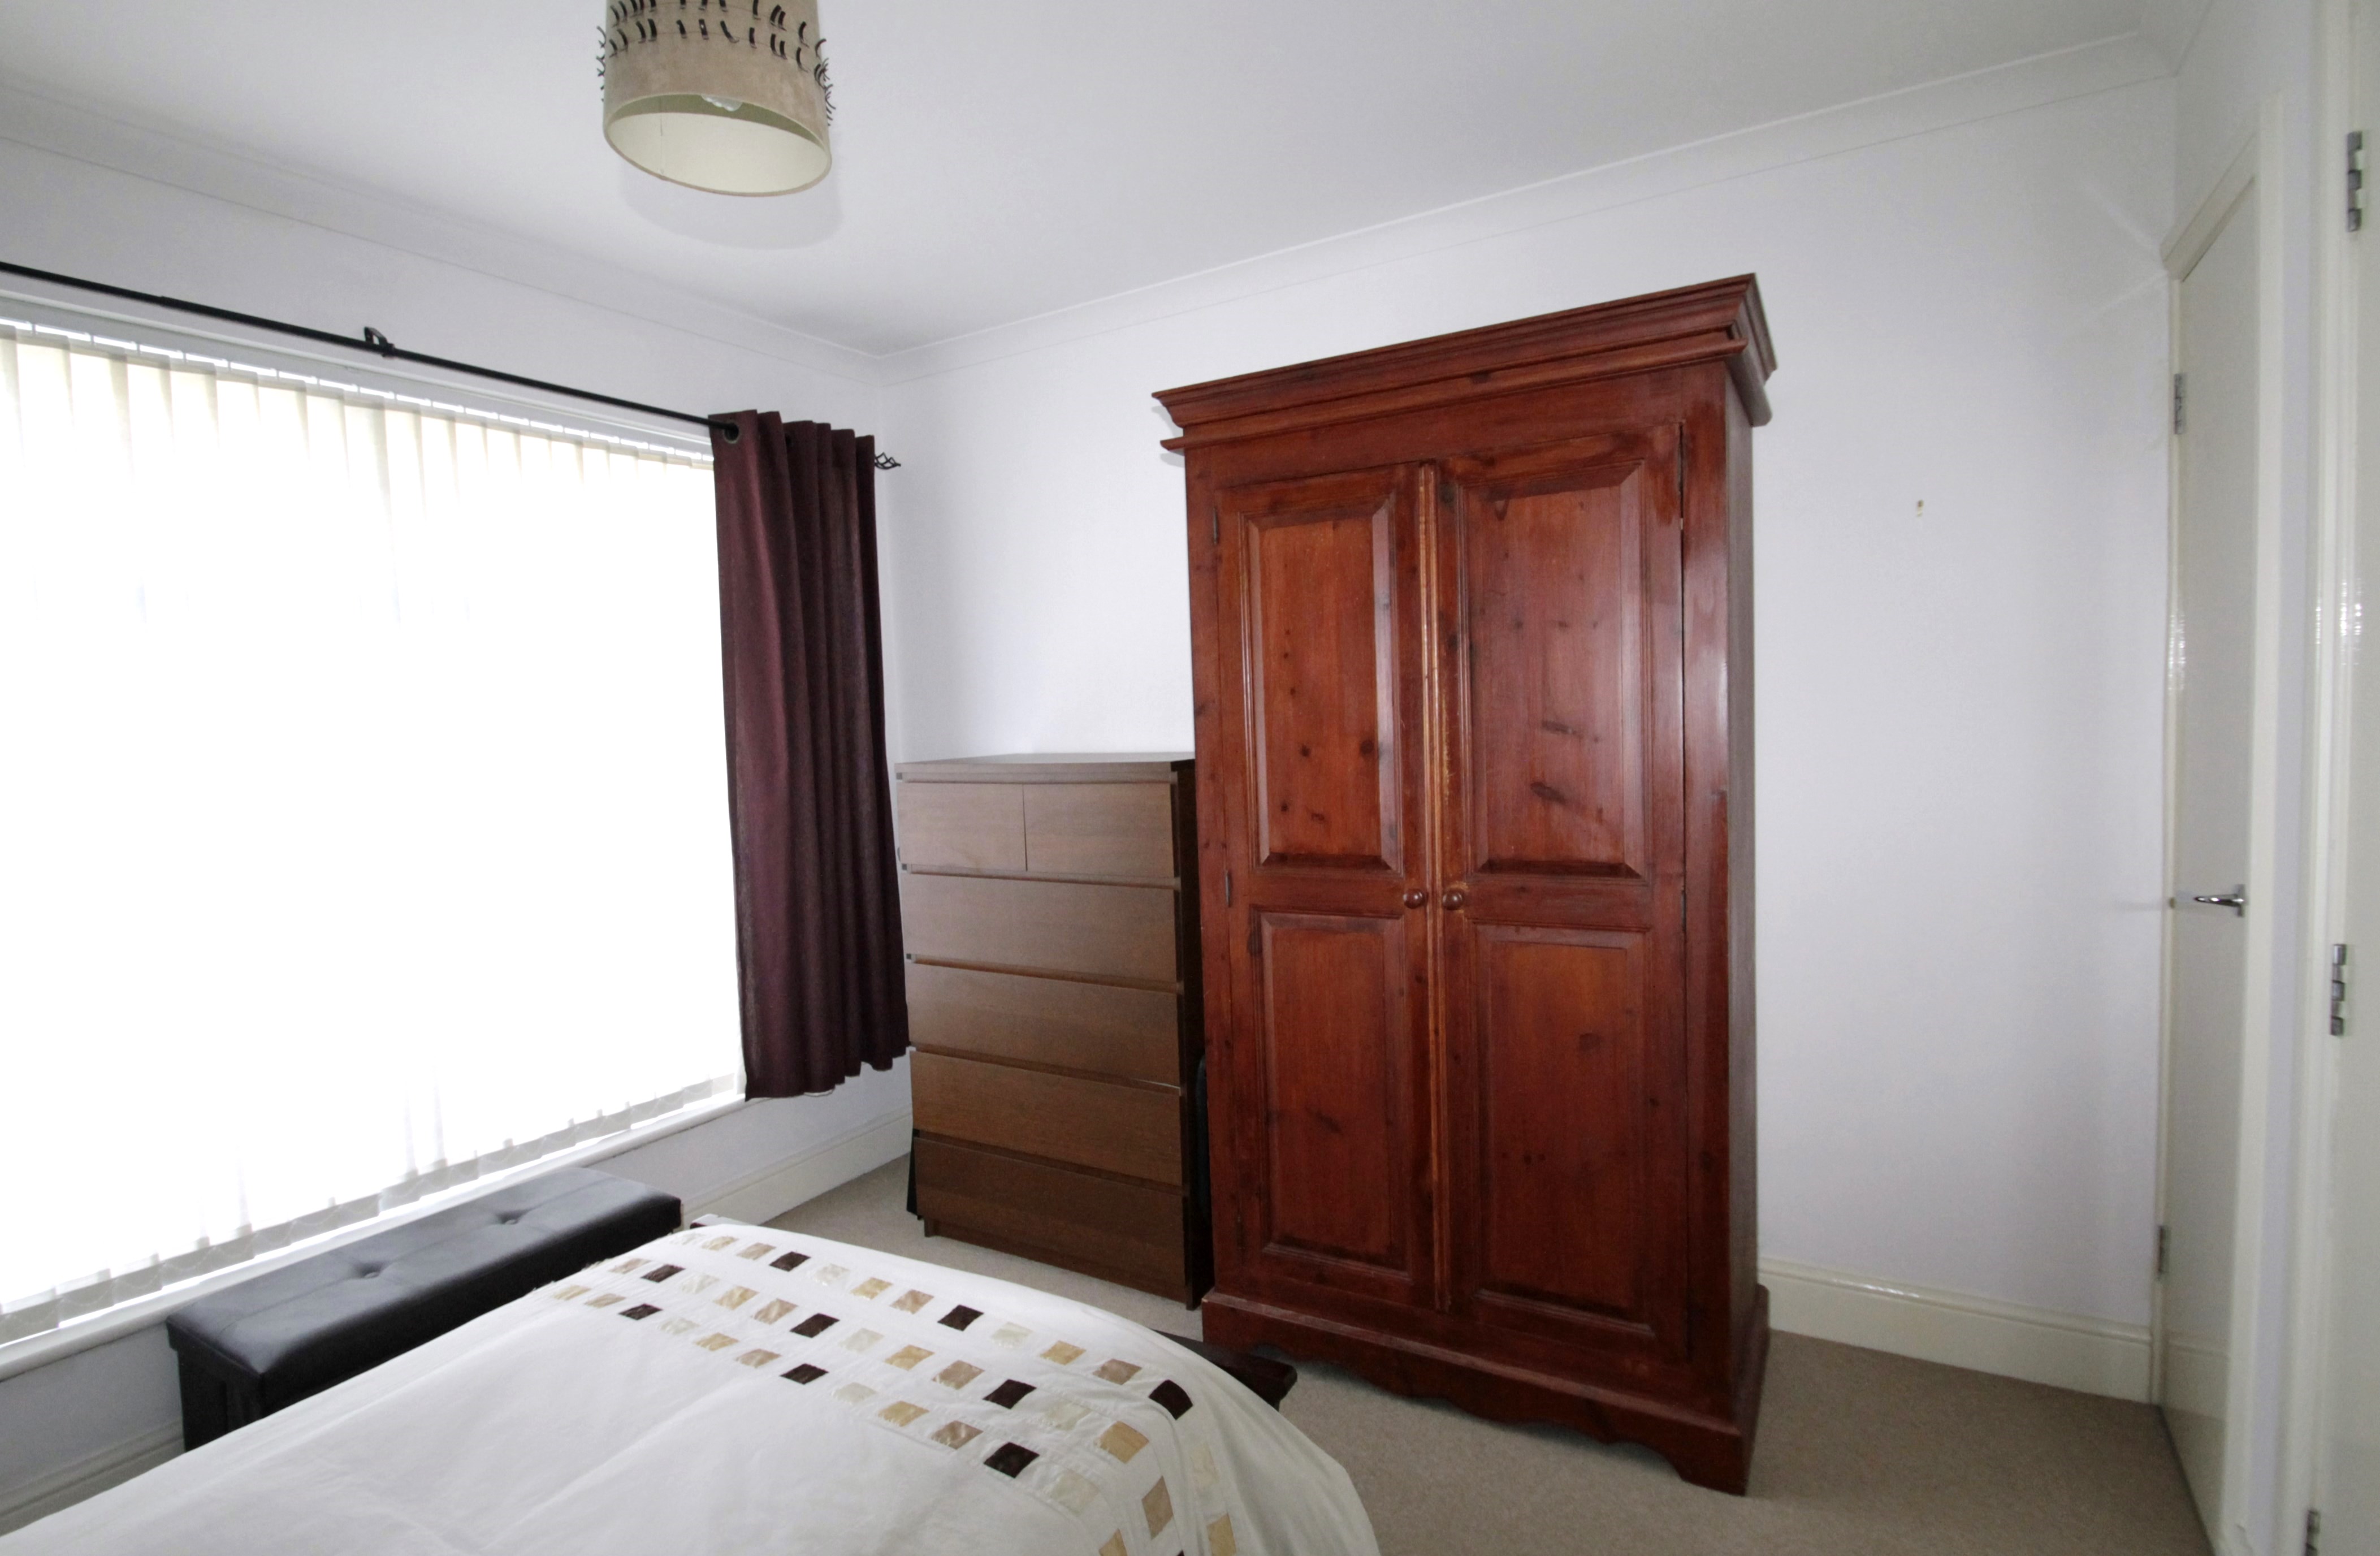 1 Bedroom Flat To Rent In Station Road Belmont Sutton Surrey